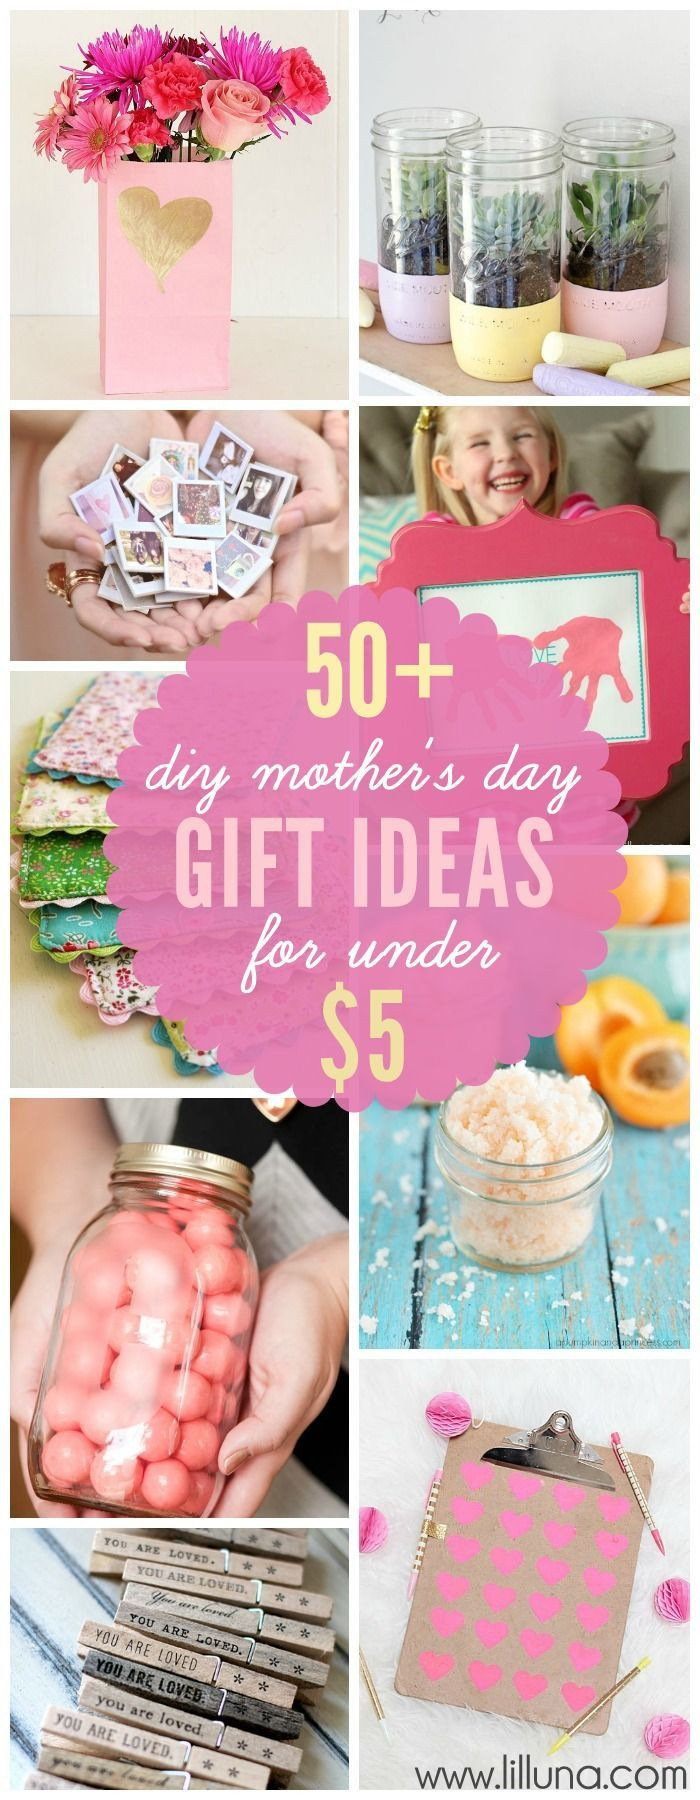 Father'S Day Gift Ideas Pinterest
 74 best images about DIY Mothers Day Gifts on Pinterest